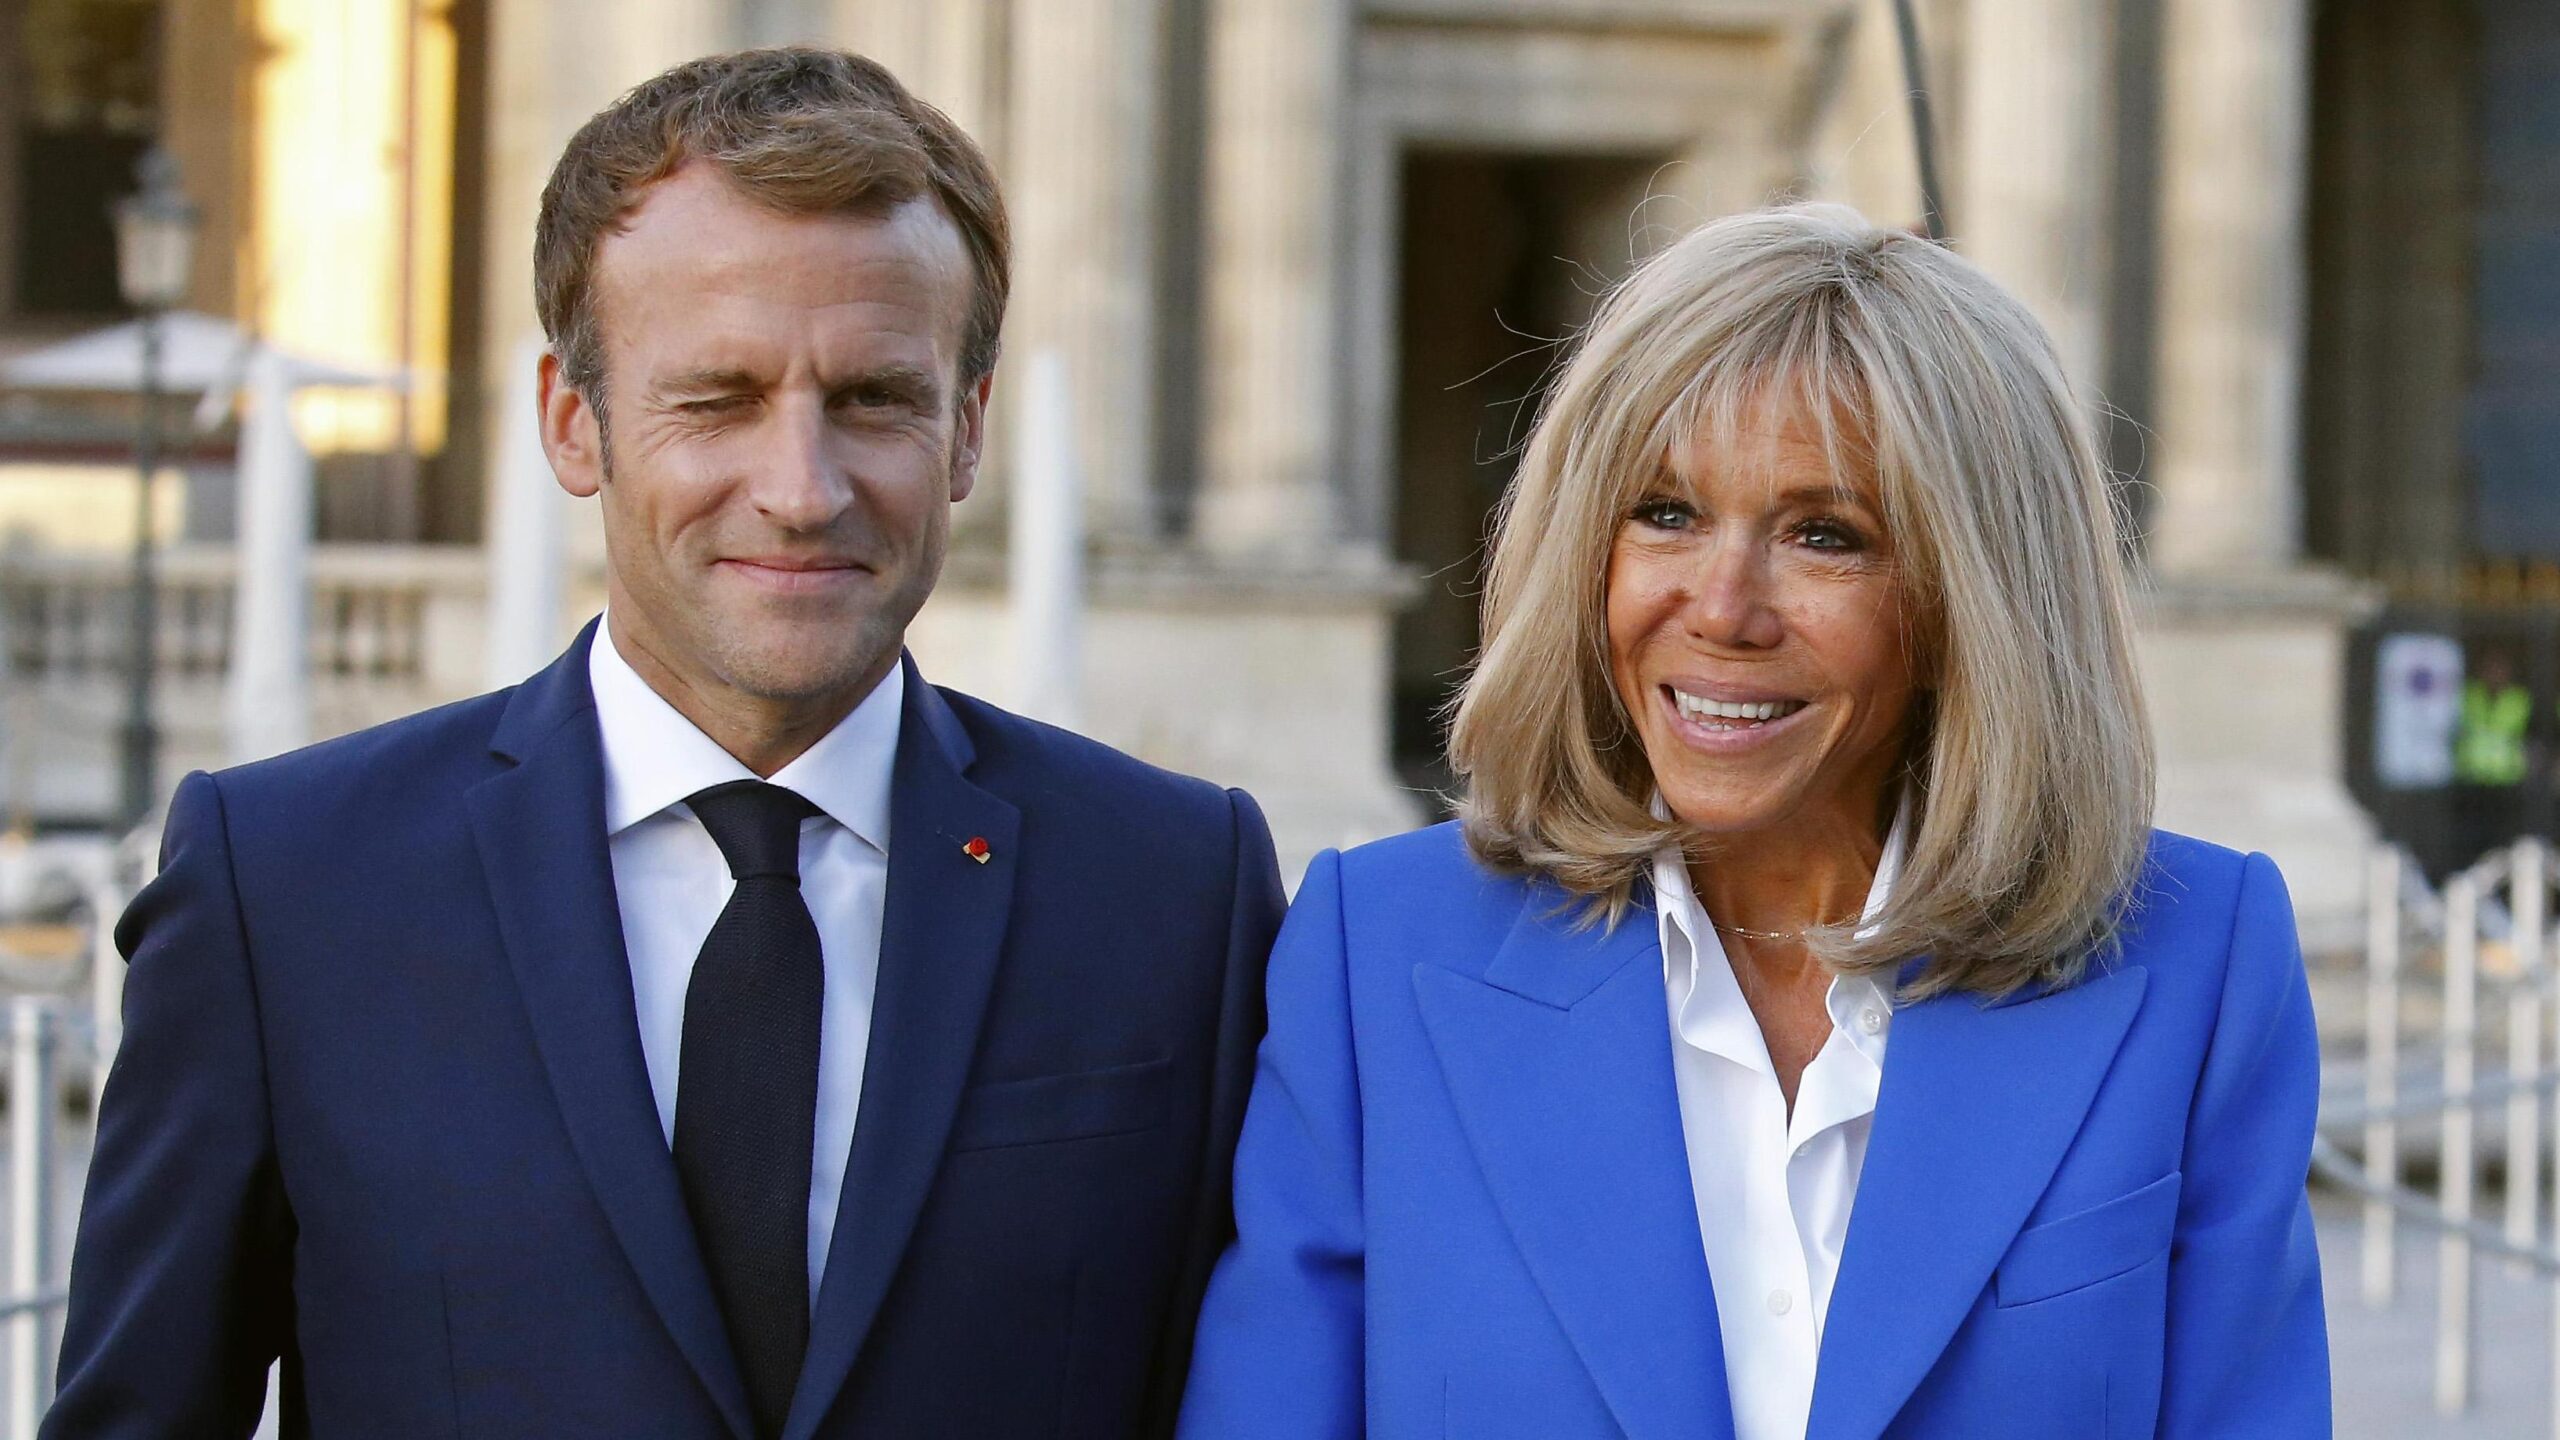 Emmanuel Macron Biography: Wife, Children, Net Worth, Family, Education, Parents, Wikipedia, Height, Siblings